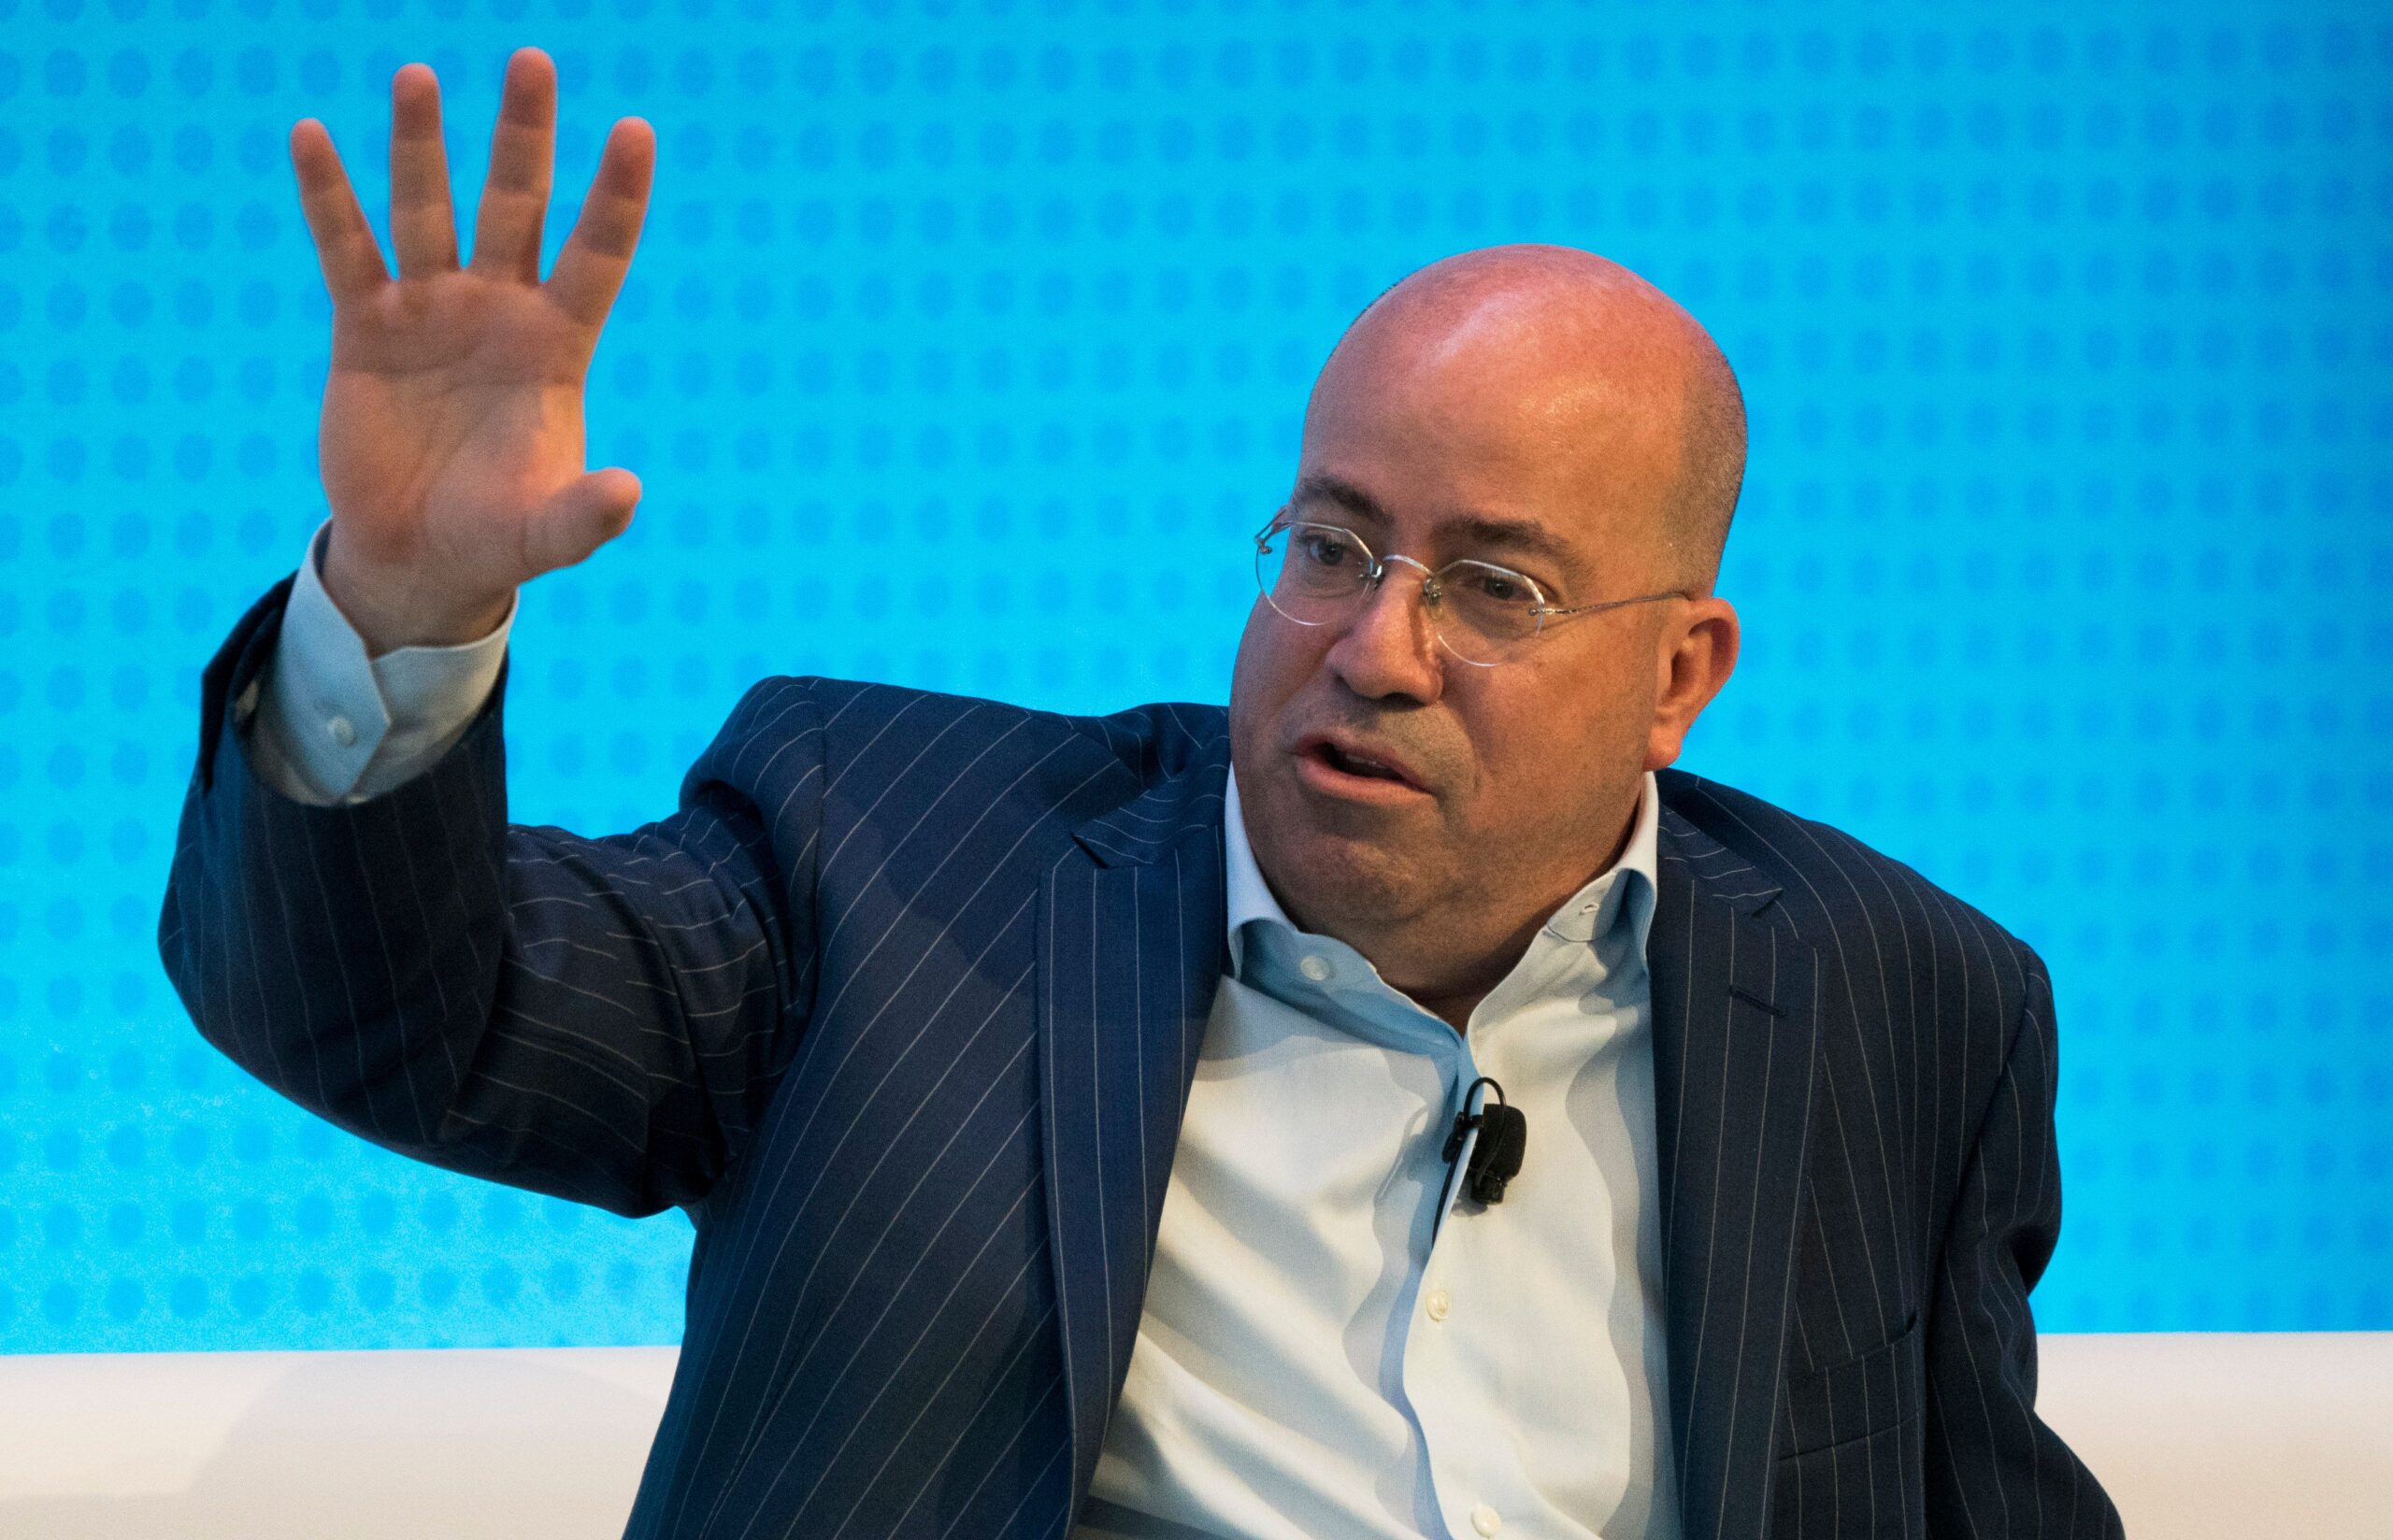 JUST IN: Former CNN Chief Jeff Zucker to Lead Sports-and-Media Investment Firm